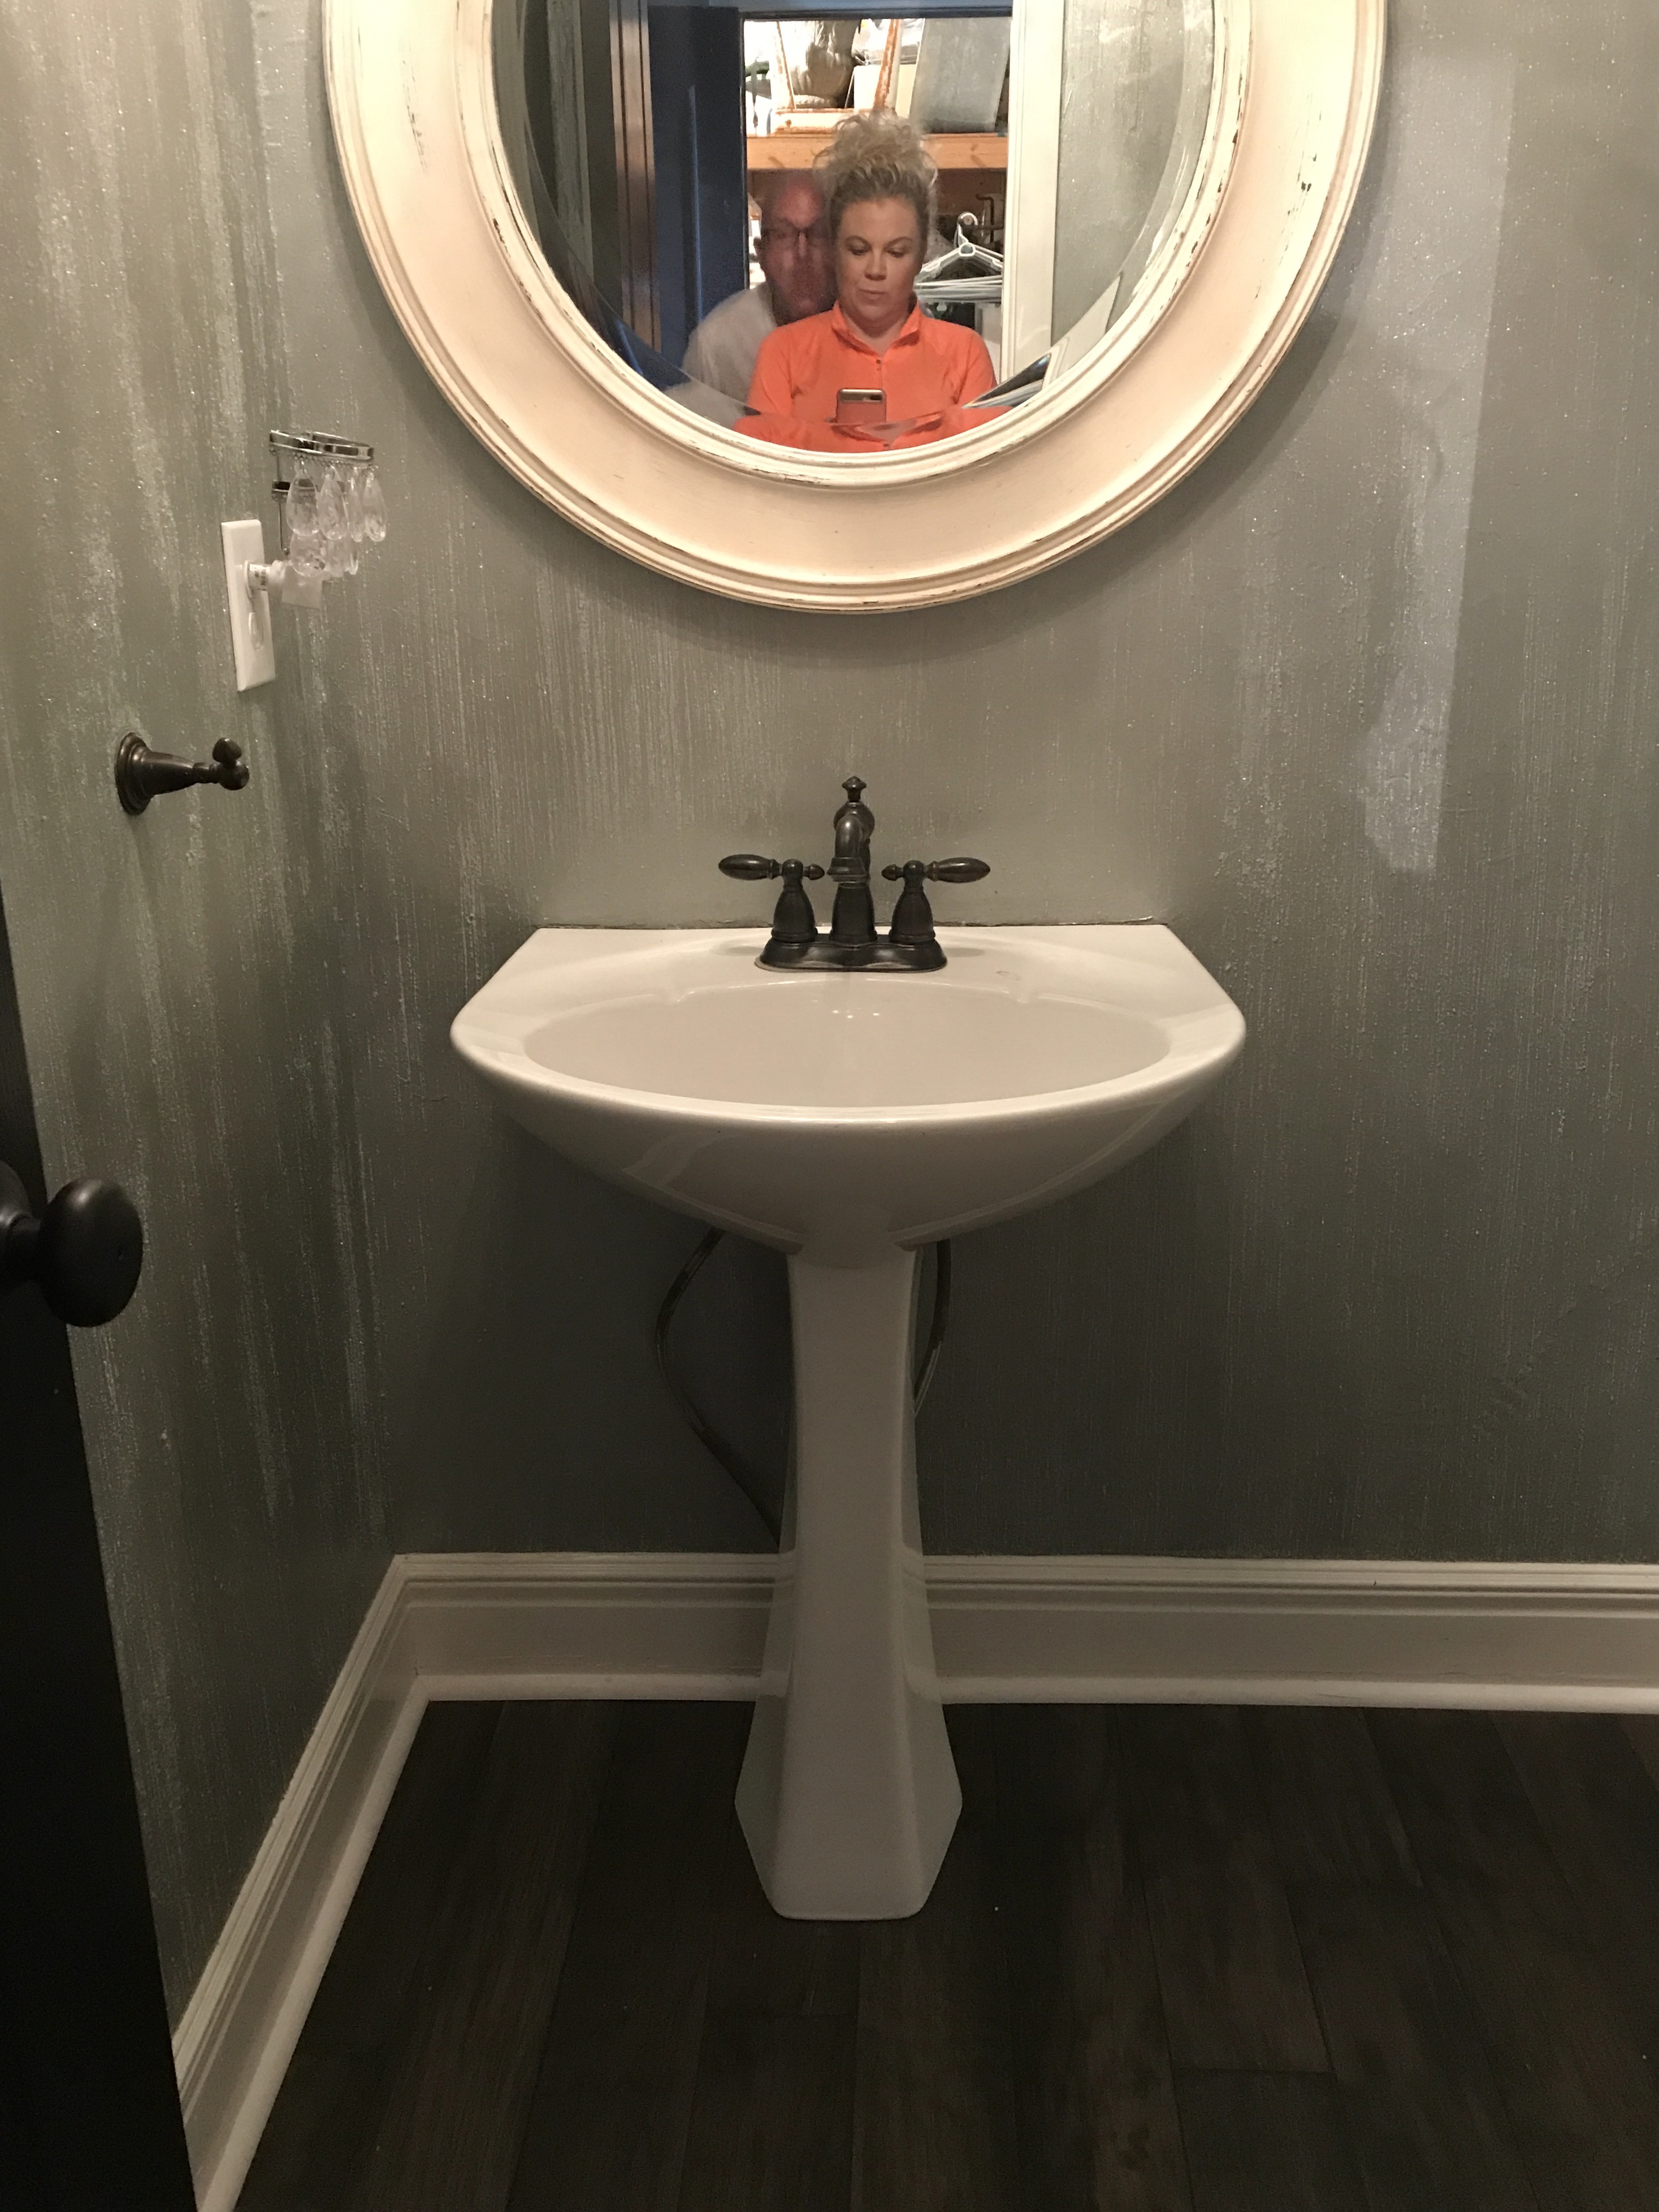 How to turn a bathroom pedestal sink into a vanity with a cabinet. 